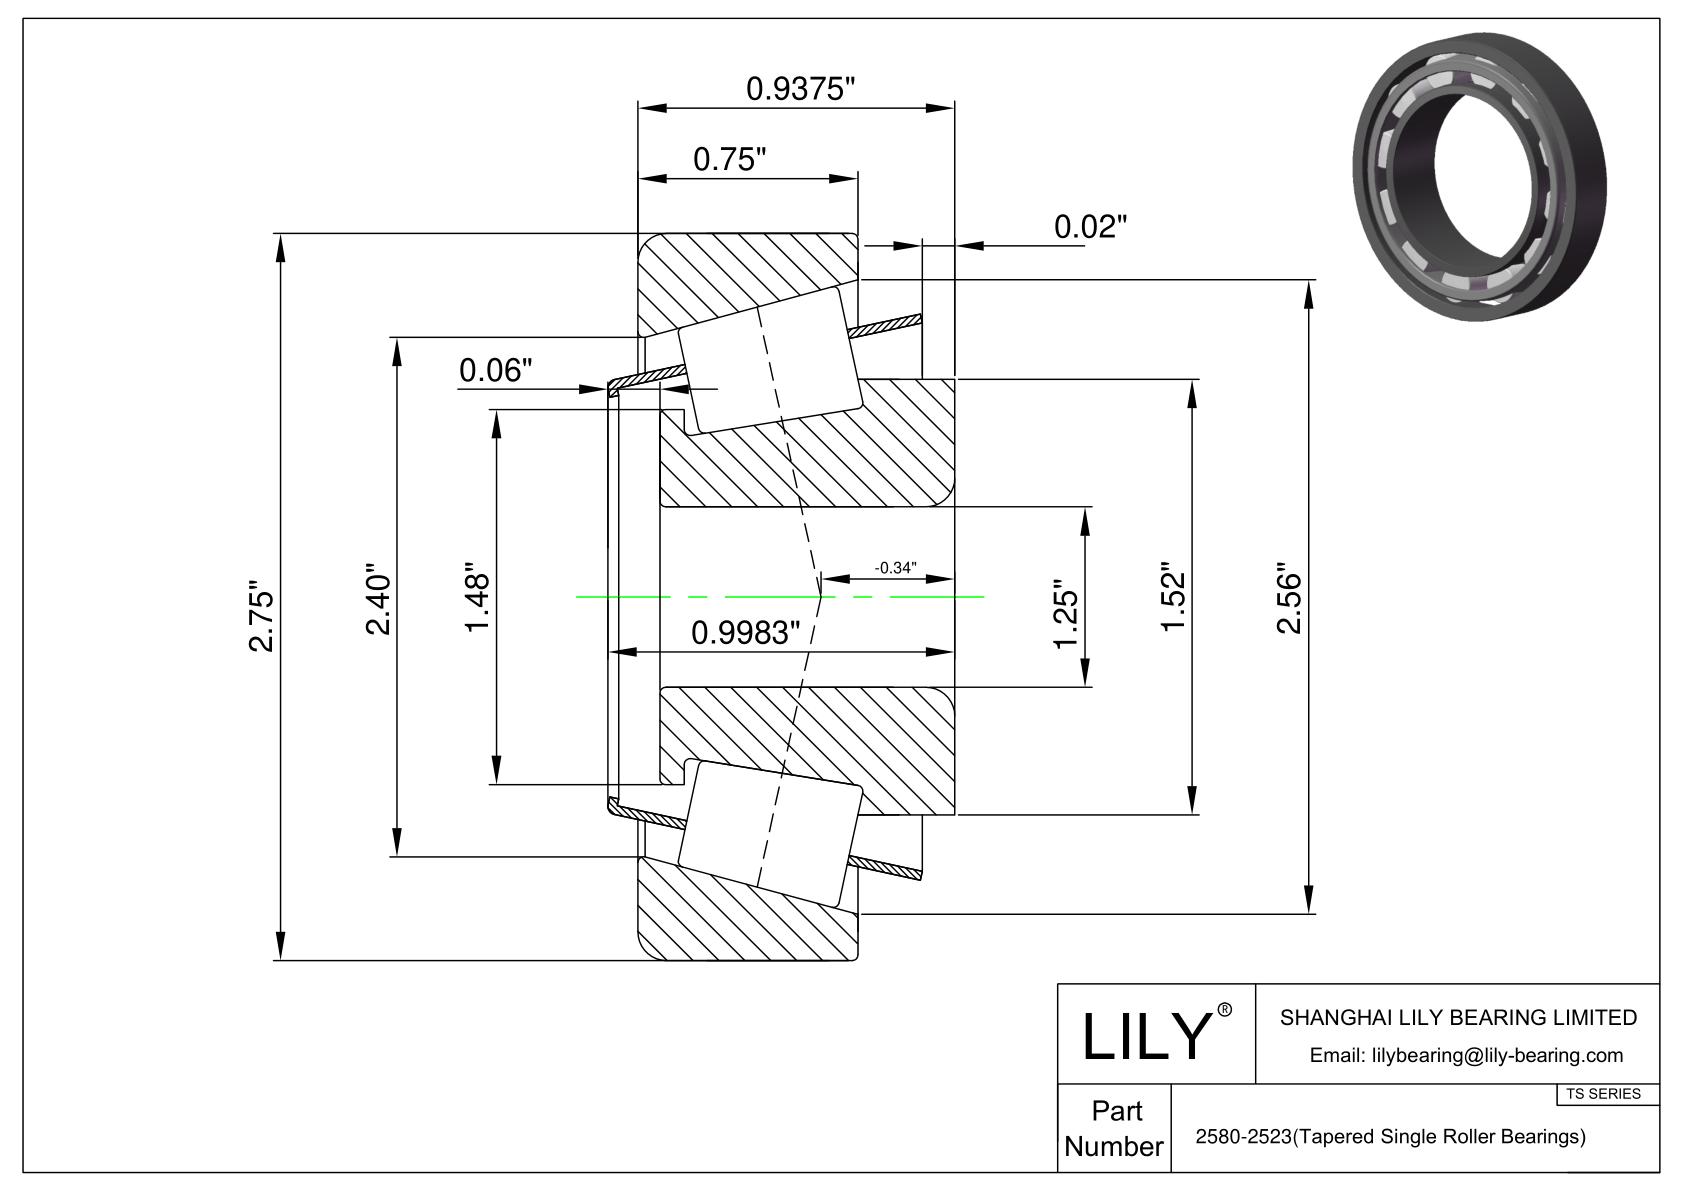 2580-2523 TS (Tapered Single Roller Bearings) (Imperial) cad drawing